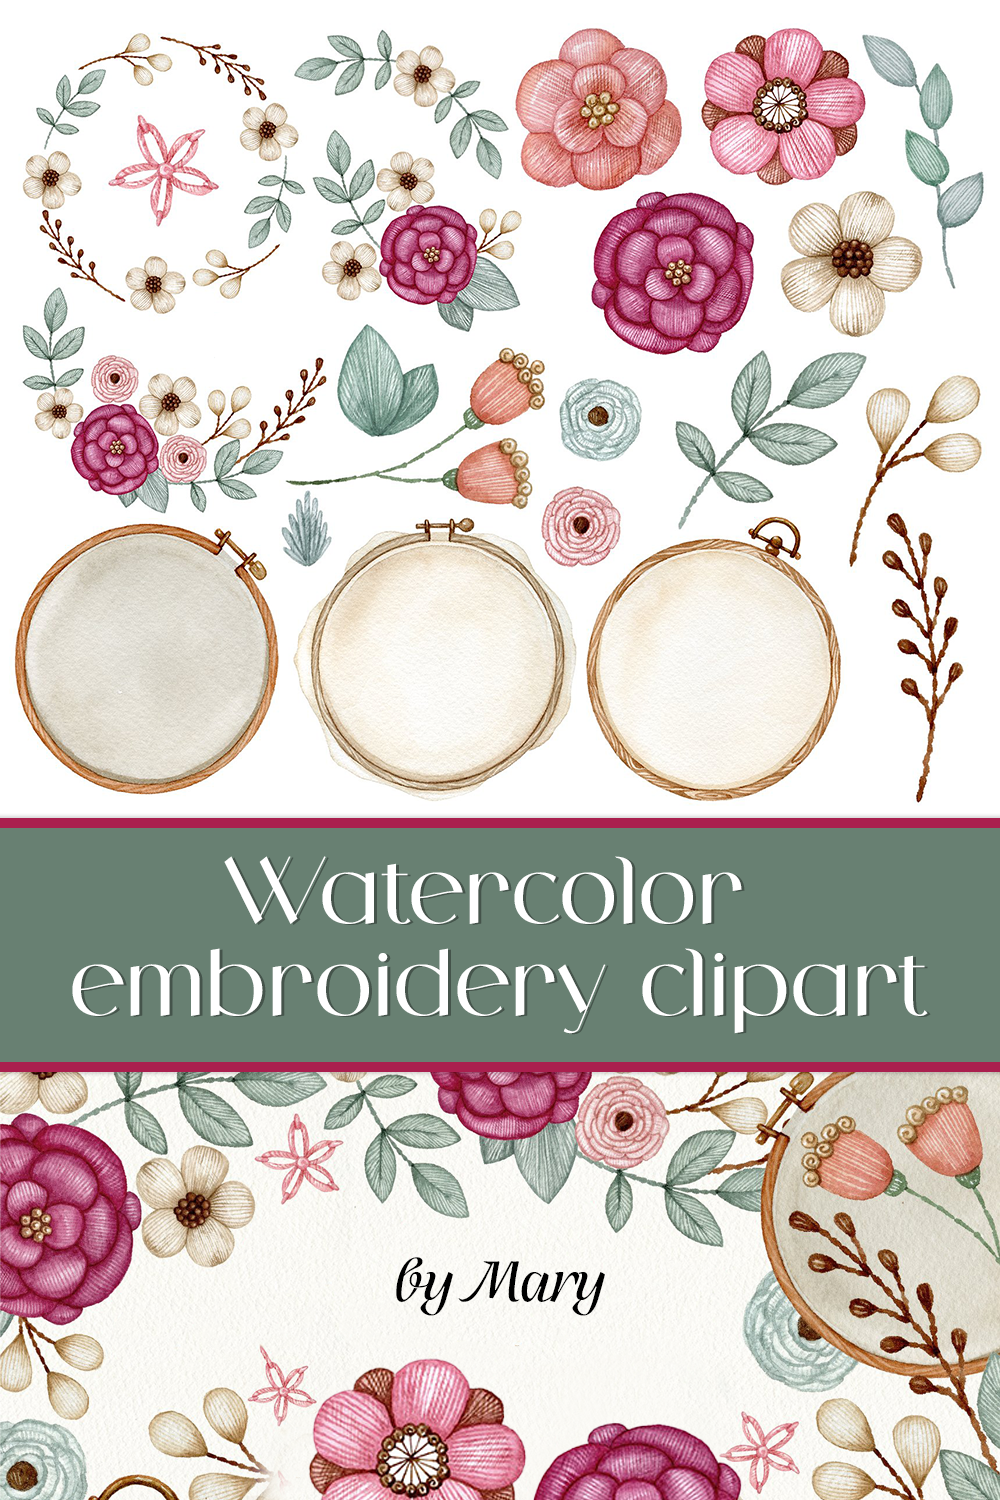 Watercolor embroidery clipart of pinterest.